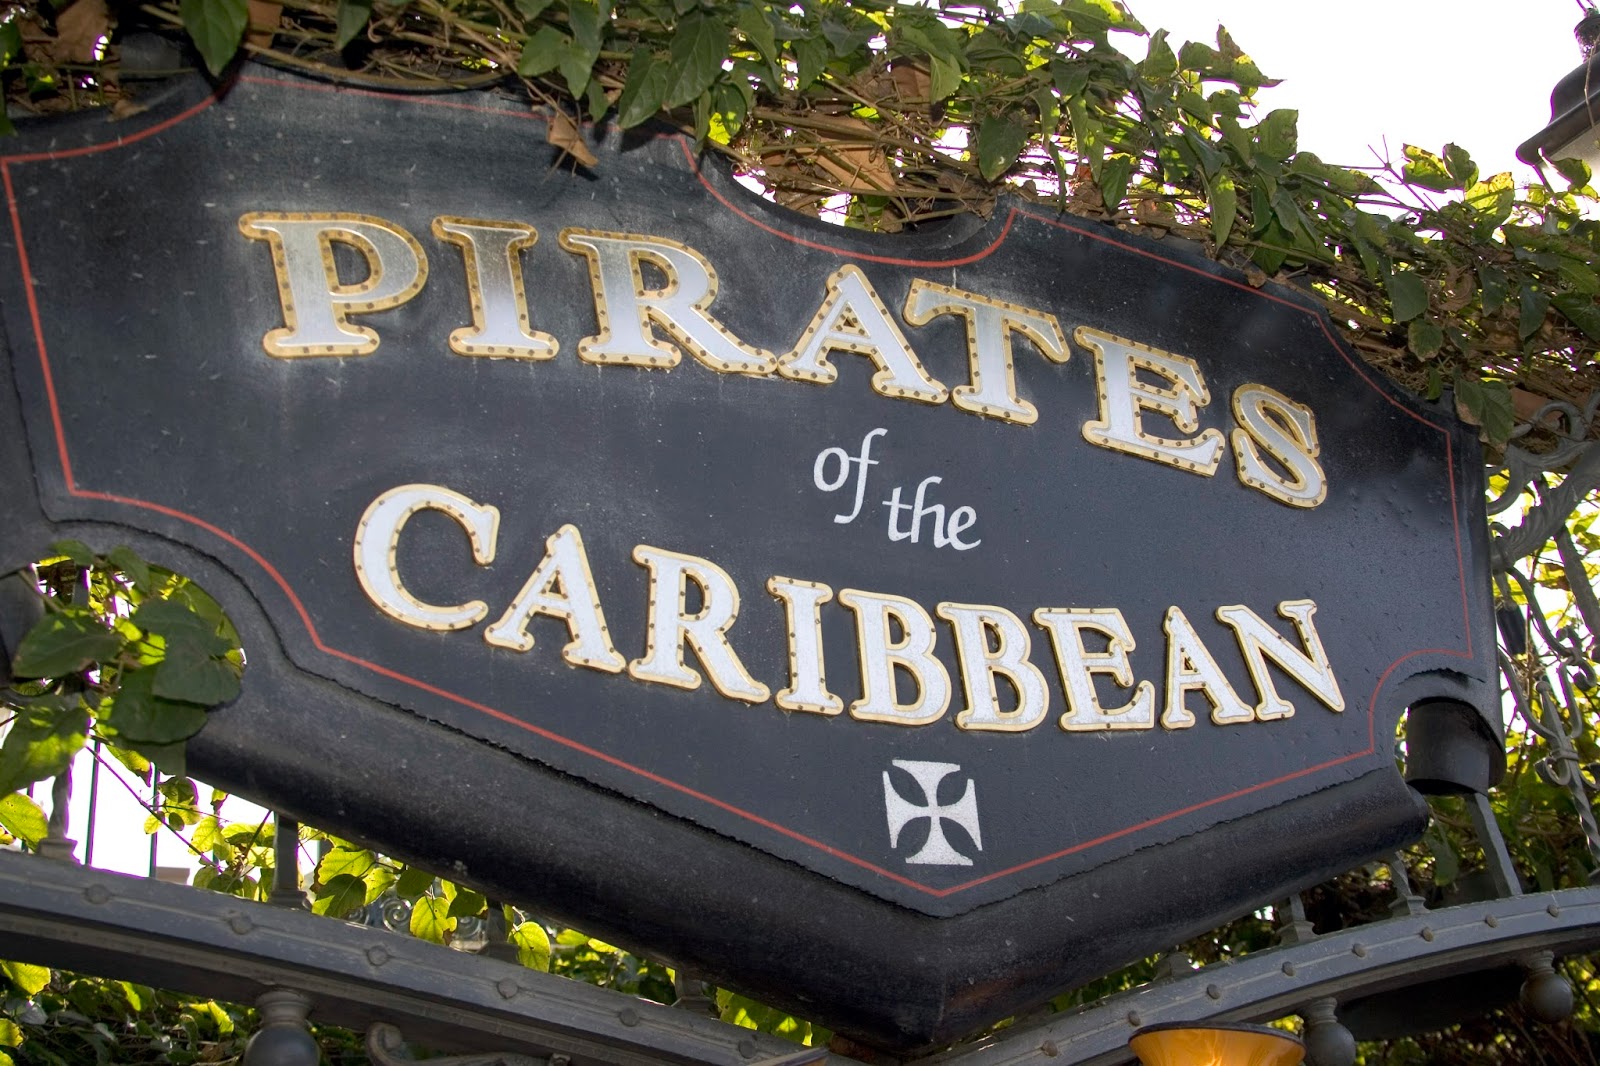 Disney’s Pirates of the Caribbean Attraction – Fun Facts